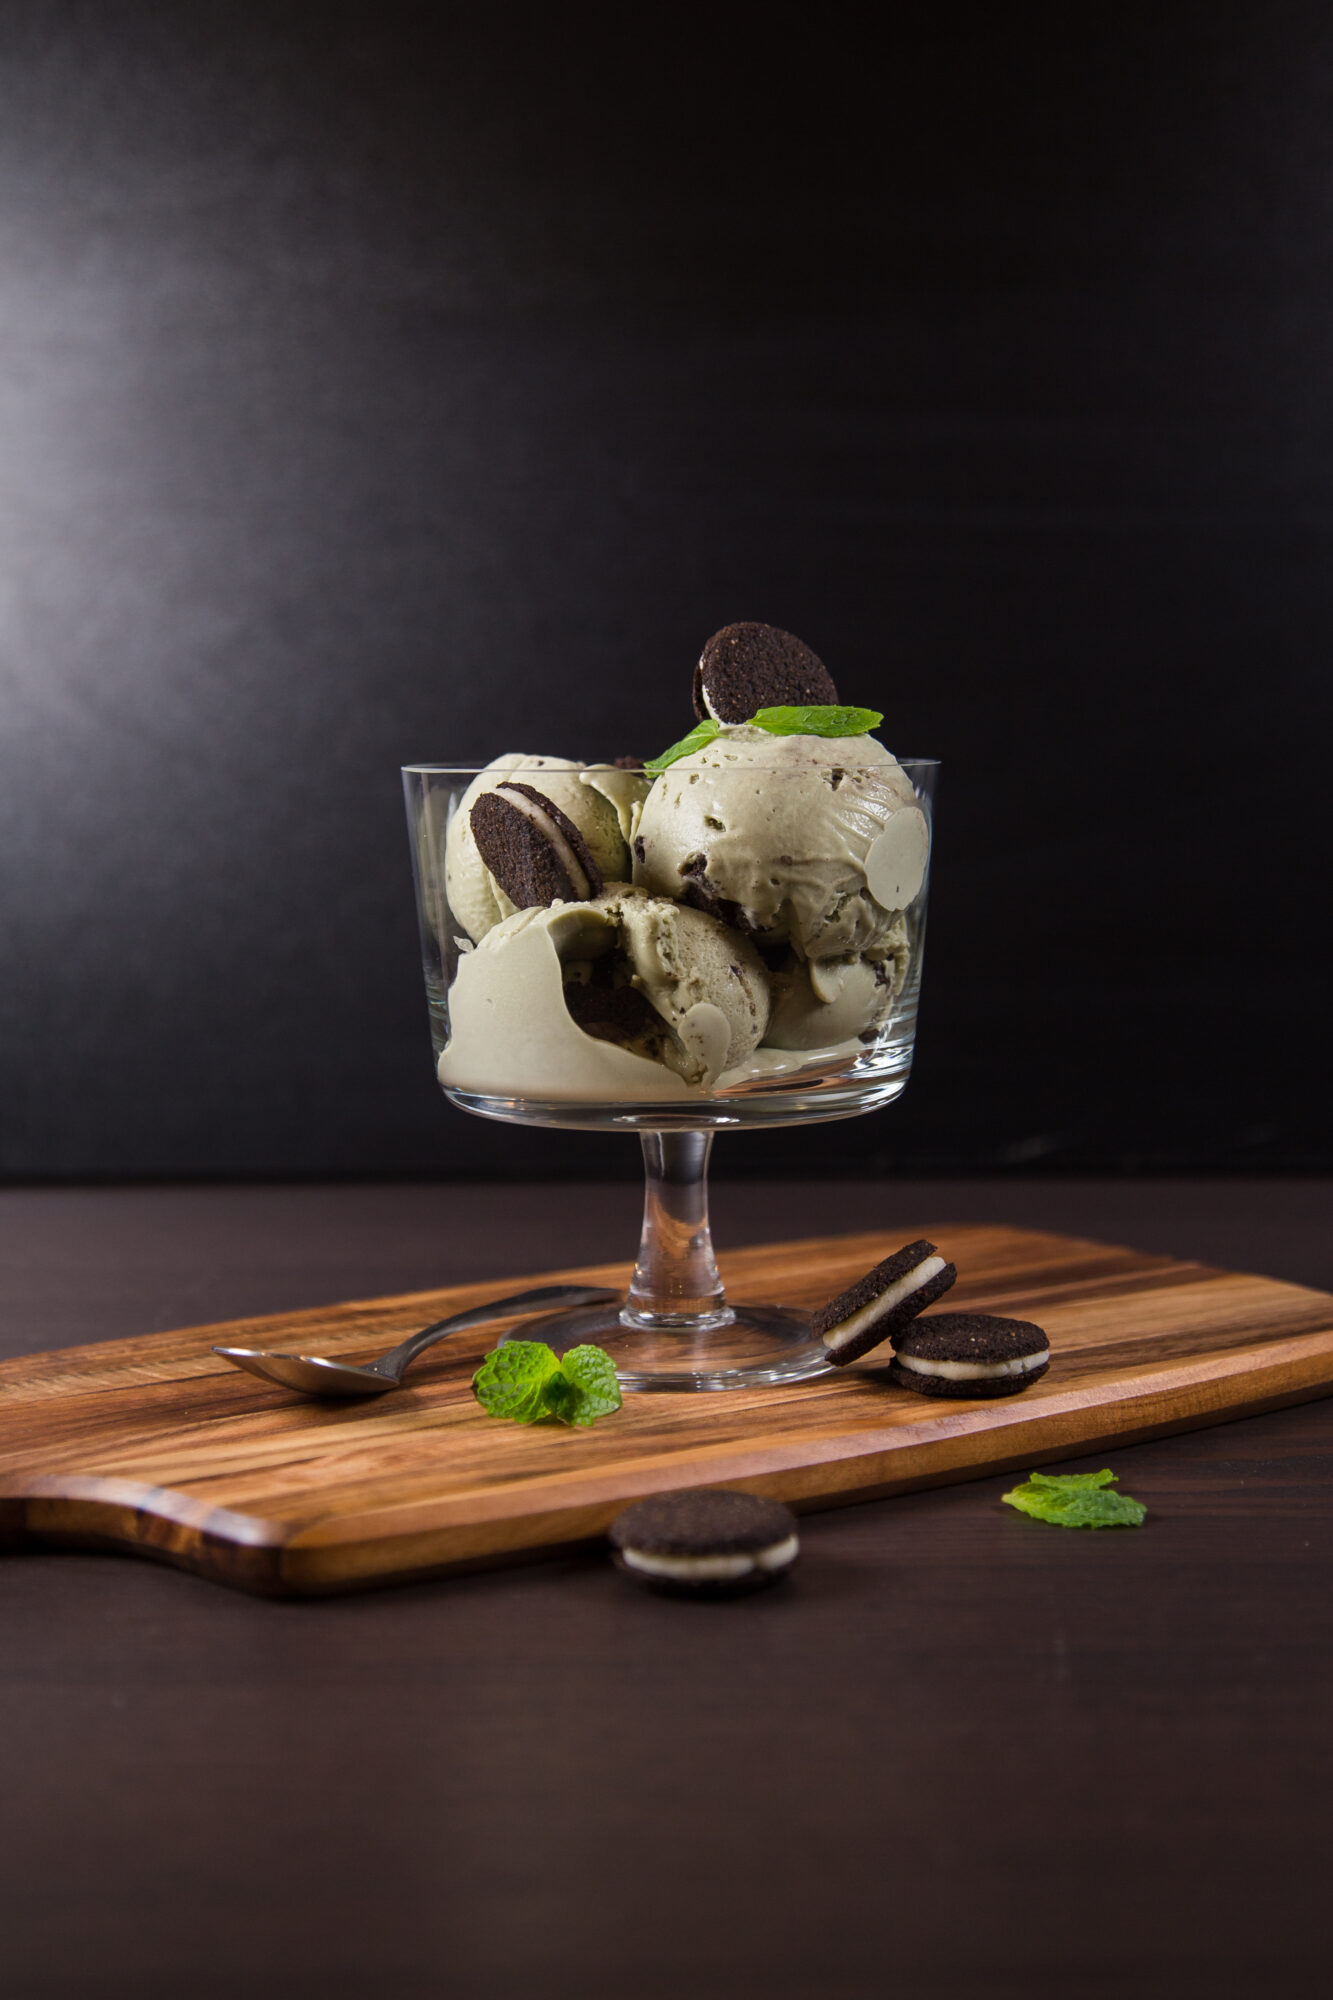 Side view - Wooden cutting board with a glass dish filled with Mint Chocolate Cookie Ice Cream, topped with cookies.